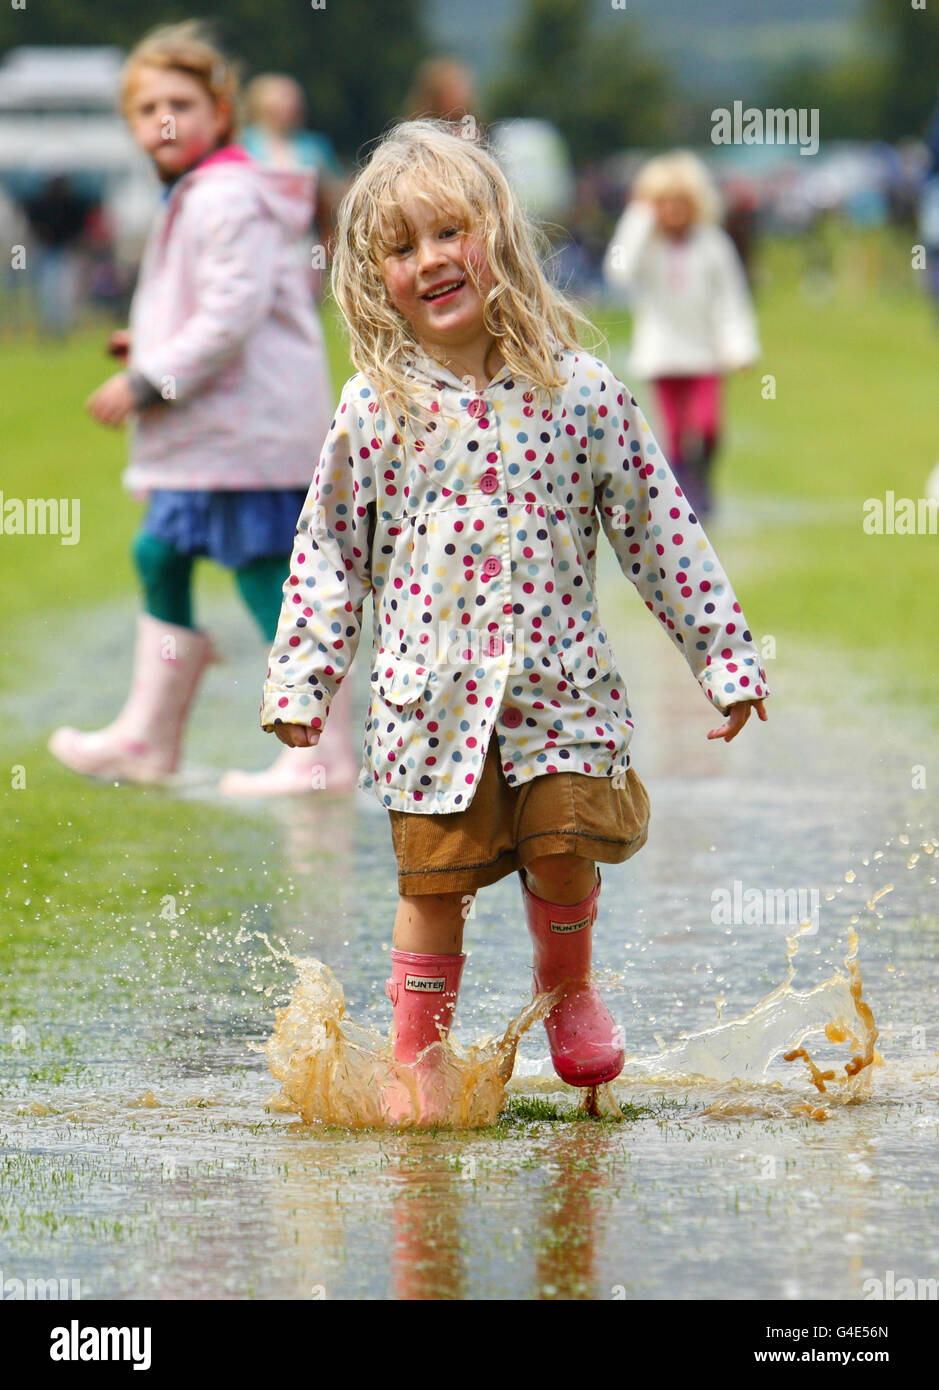 Ruby Moorhouse 4, enjoys a puddle created by a sudden downpour before the Veuve Clicquot Gold Cup Polo final at Cowdray, West Sussex. Stock Photo